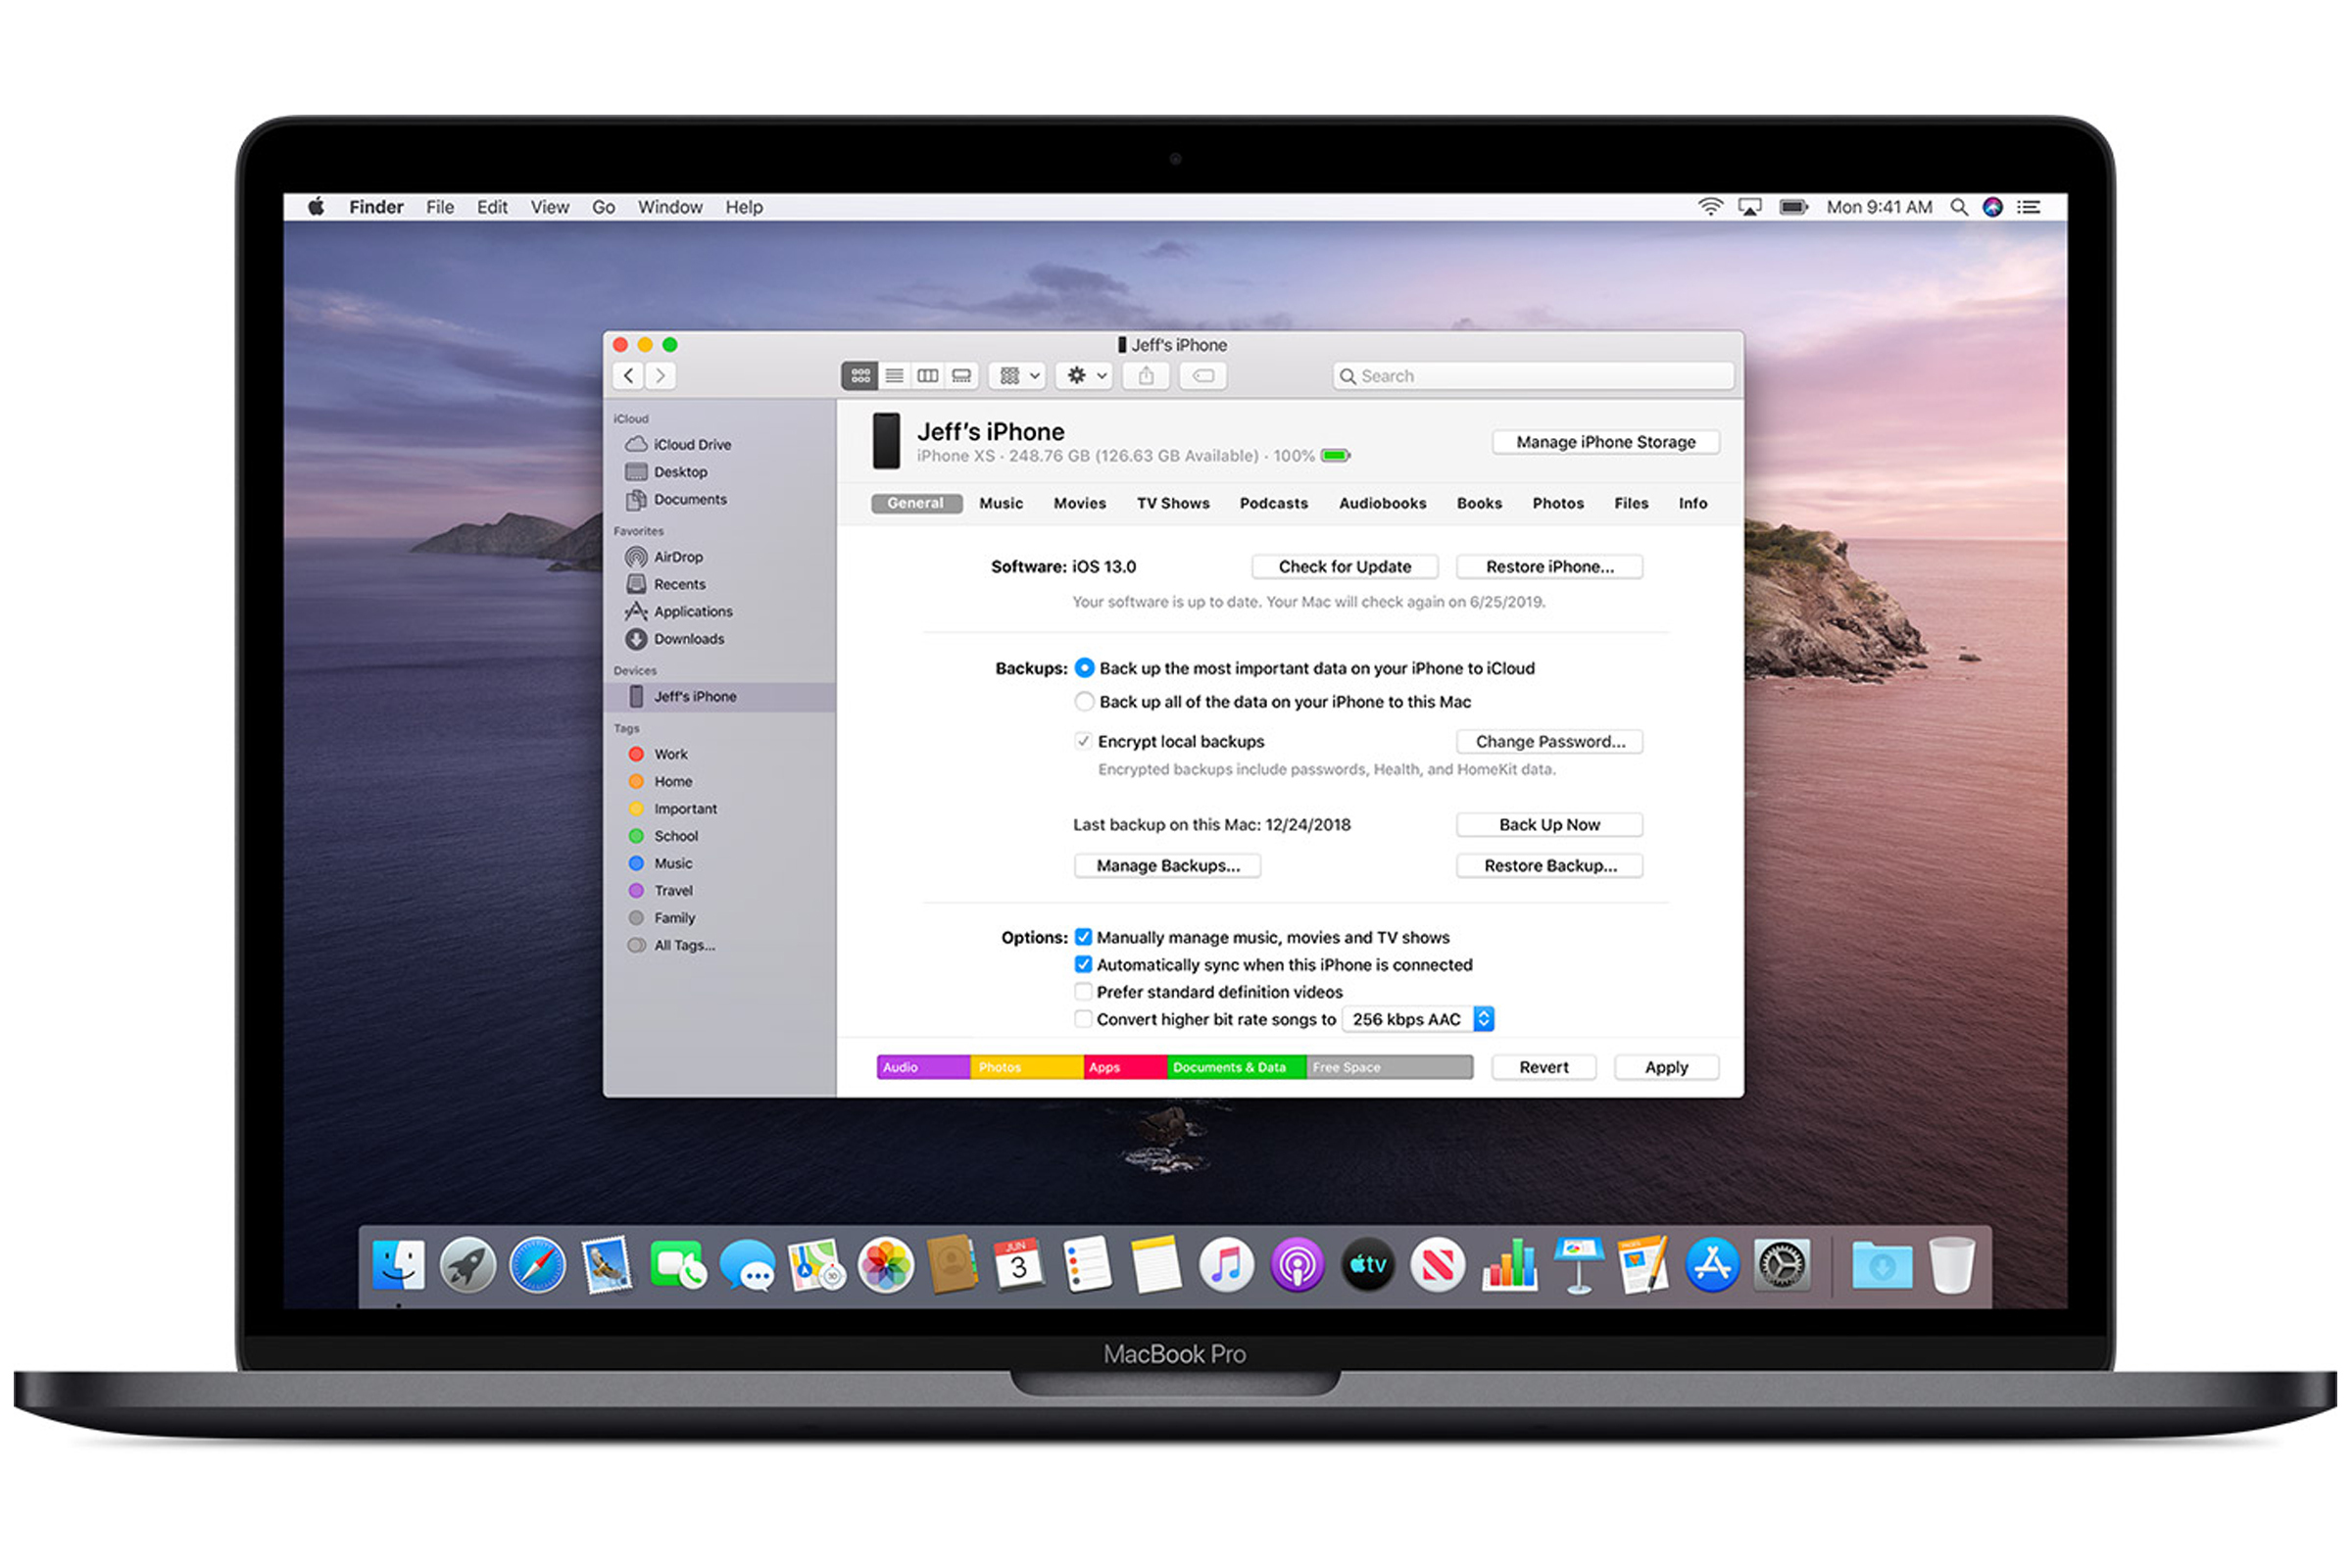 Which system apps can macos work without downloading